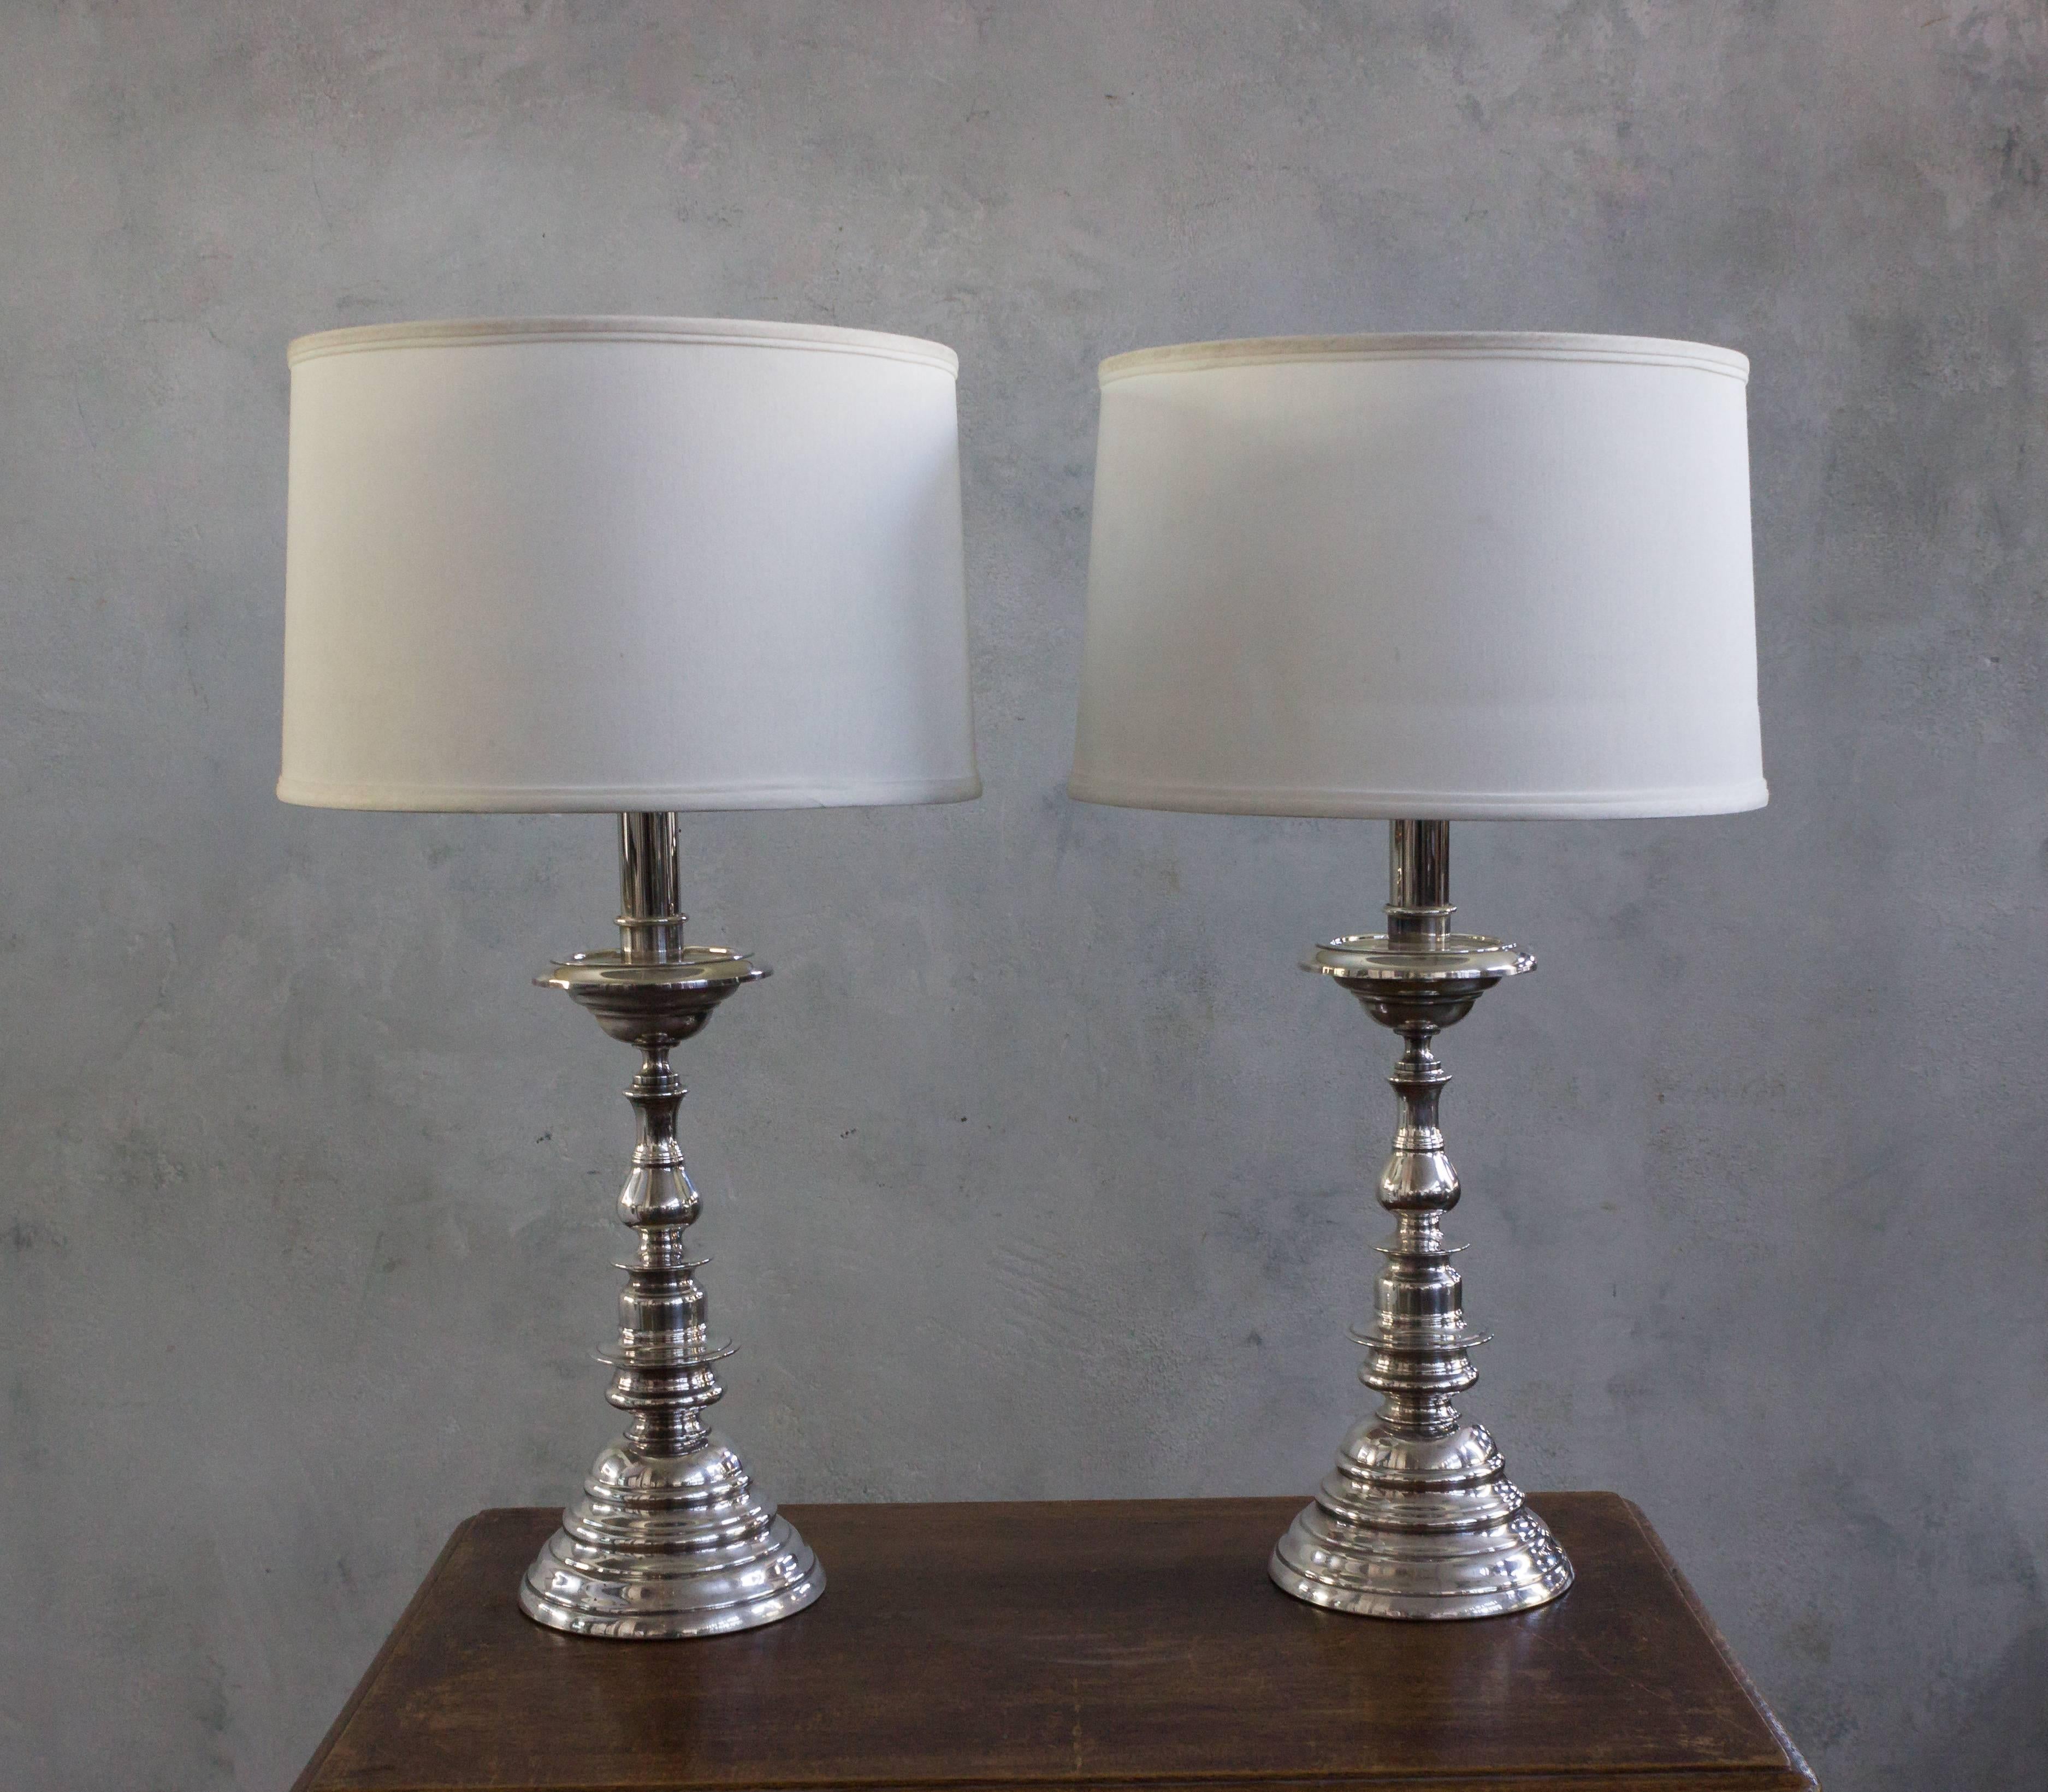 Pair of Spanish silver plated lamps. Recently replated. Wired for showroom display. Shades are not included.